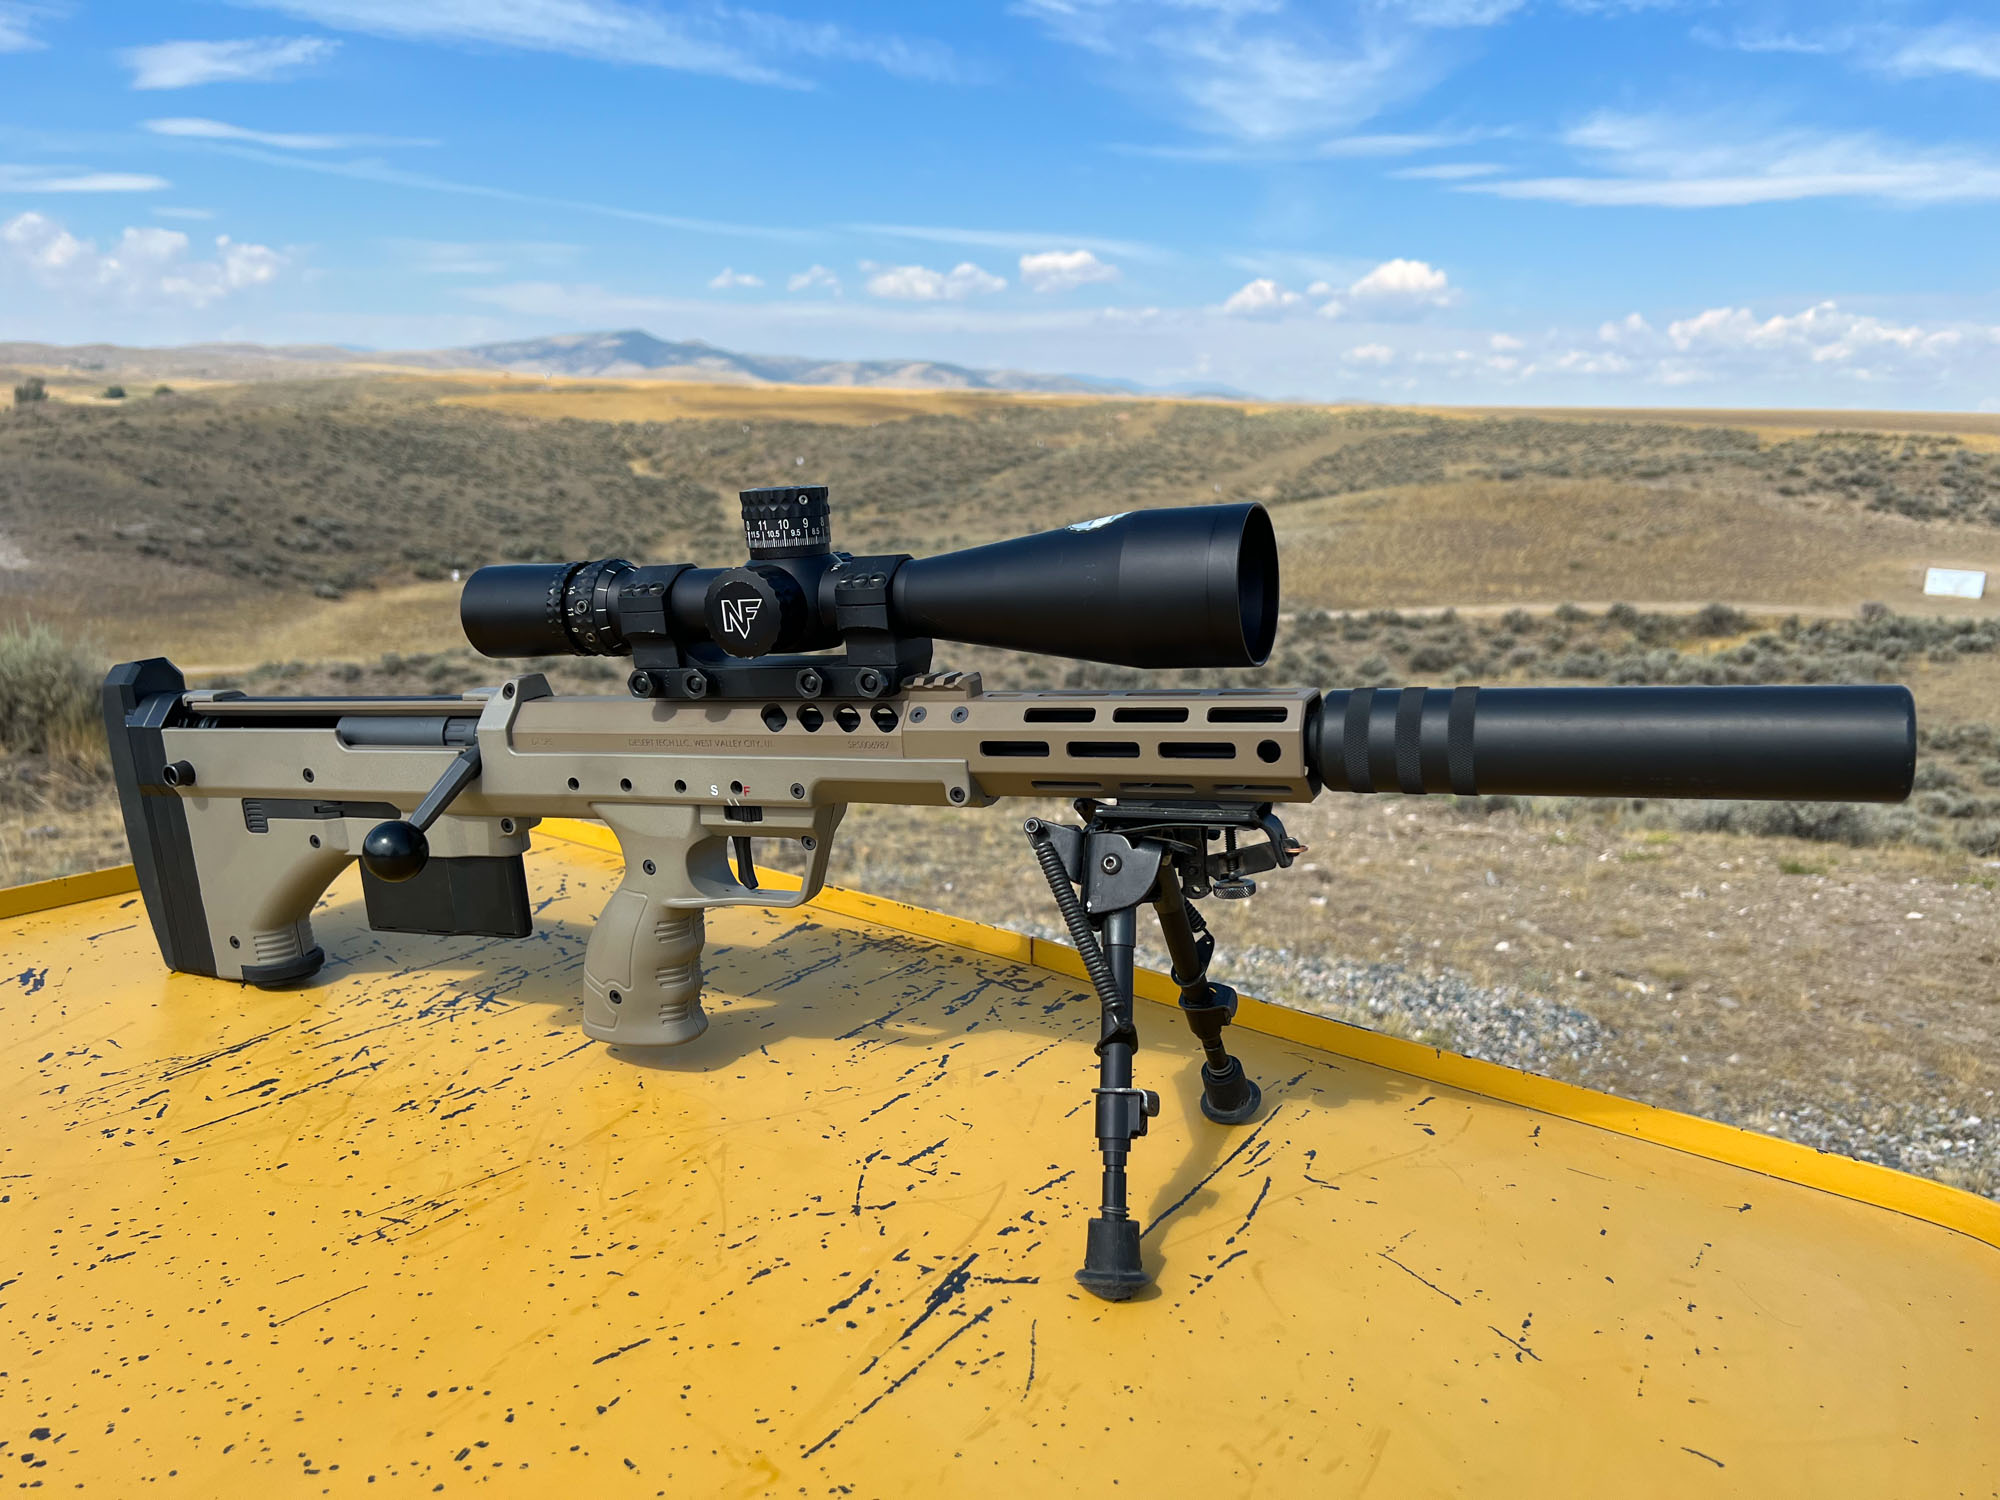 Desert tech rifle with nightforce scope and elite iron stfu sound suppressor on a shooting bench in montana